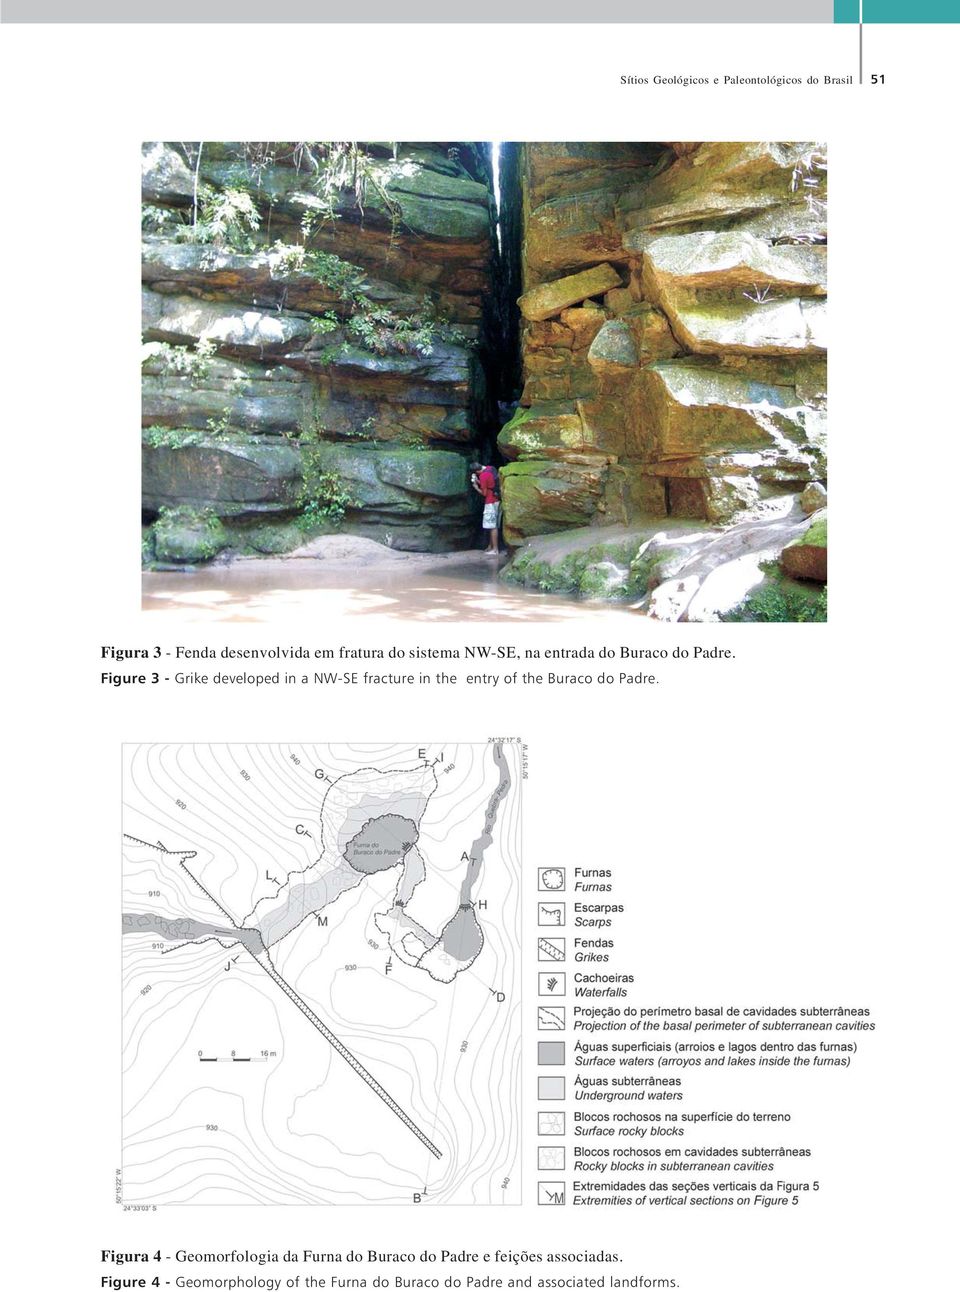 Figure 3 - Grike developed in a NW-SE fracture in the entry of the Buraco do Padre.